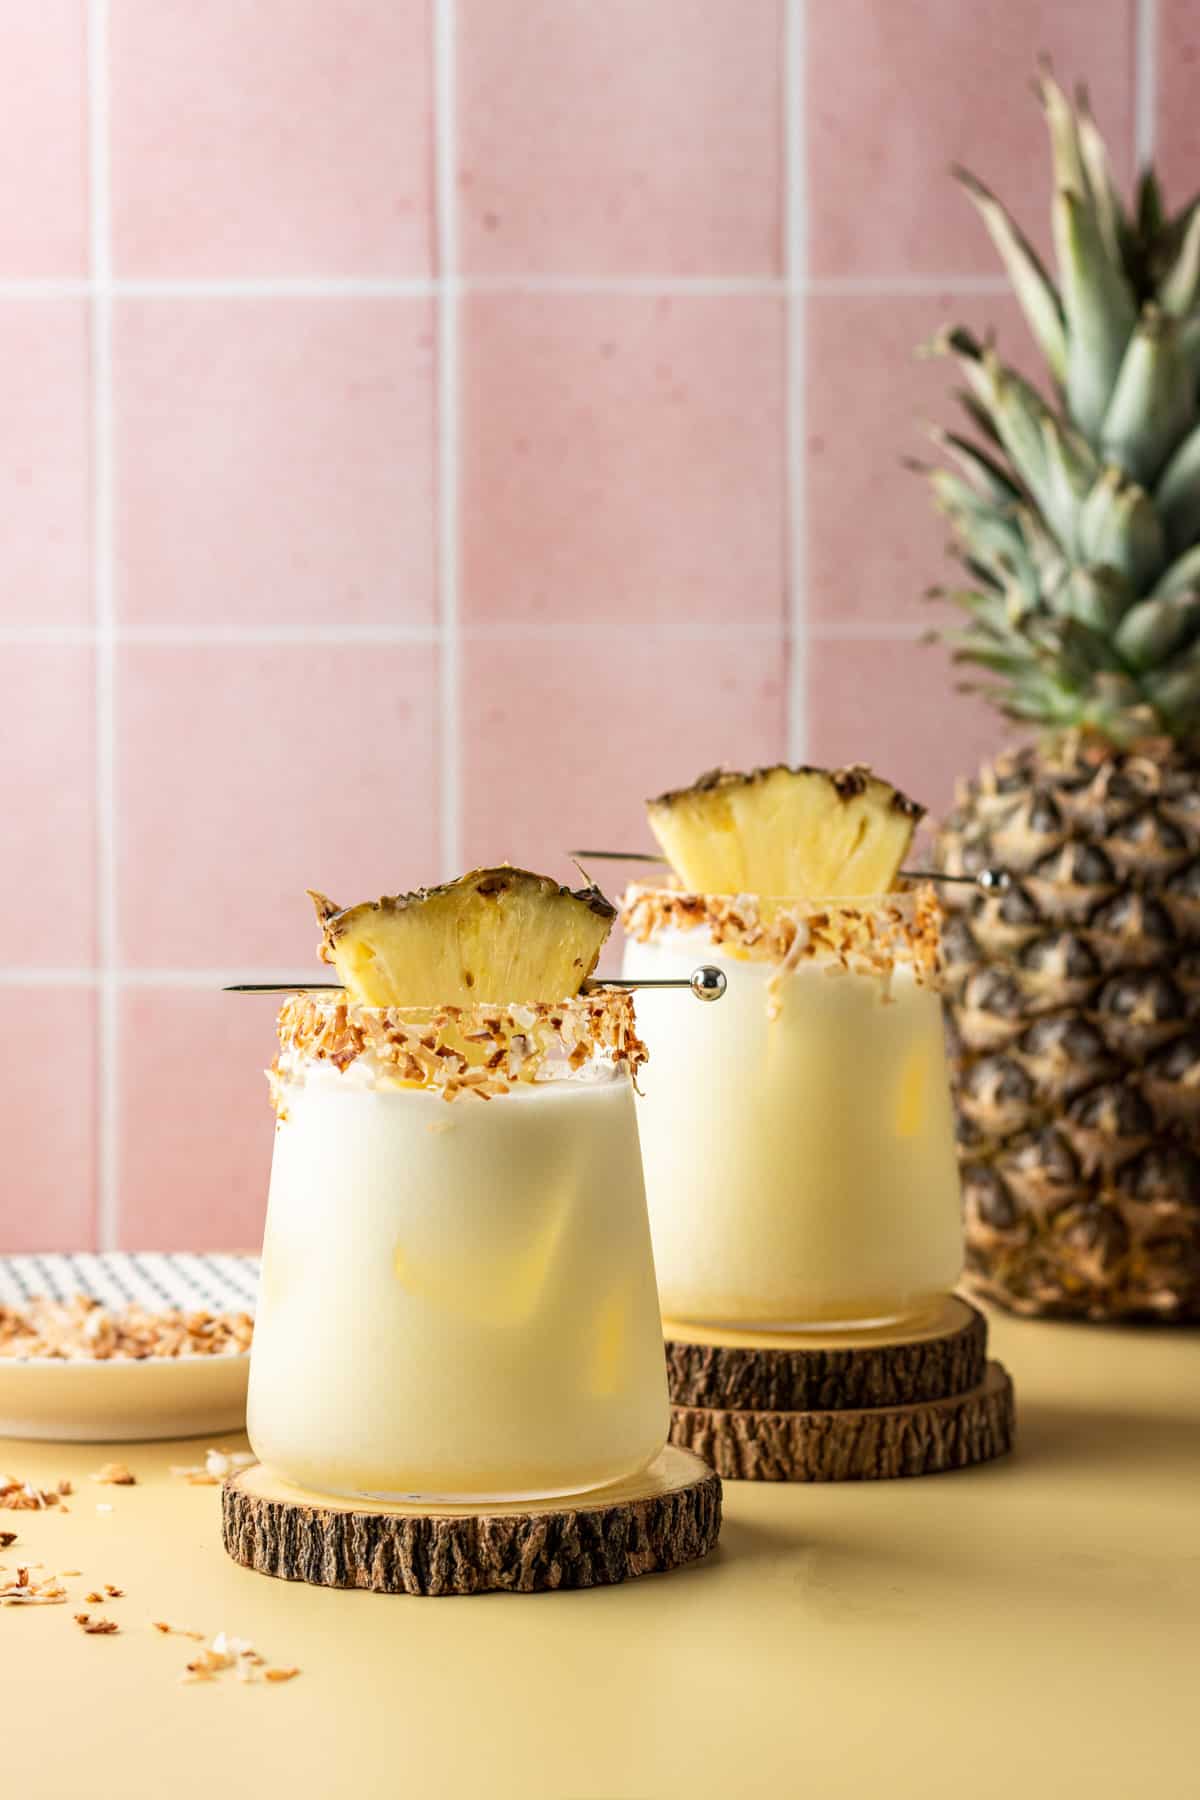 Two pineapple coconut margaritas in glasses garnished with toasted coconut and a pineapple wedge on wooden coasters.